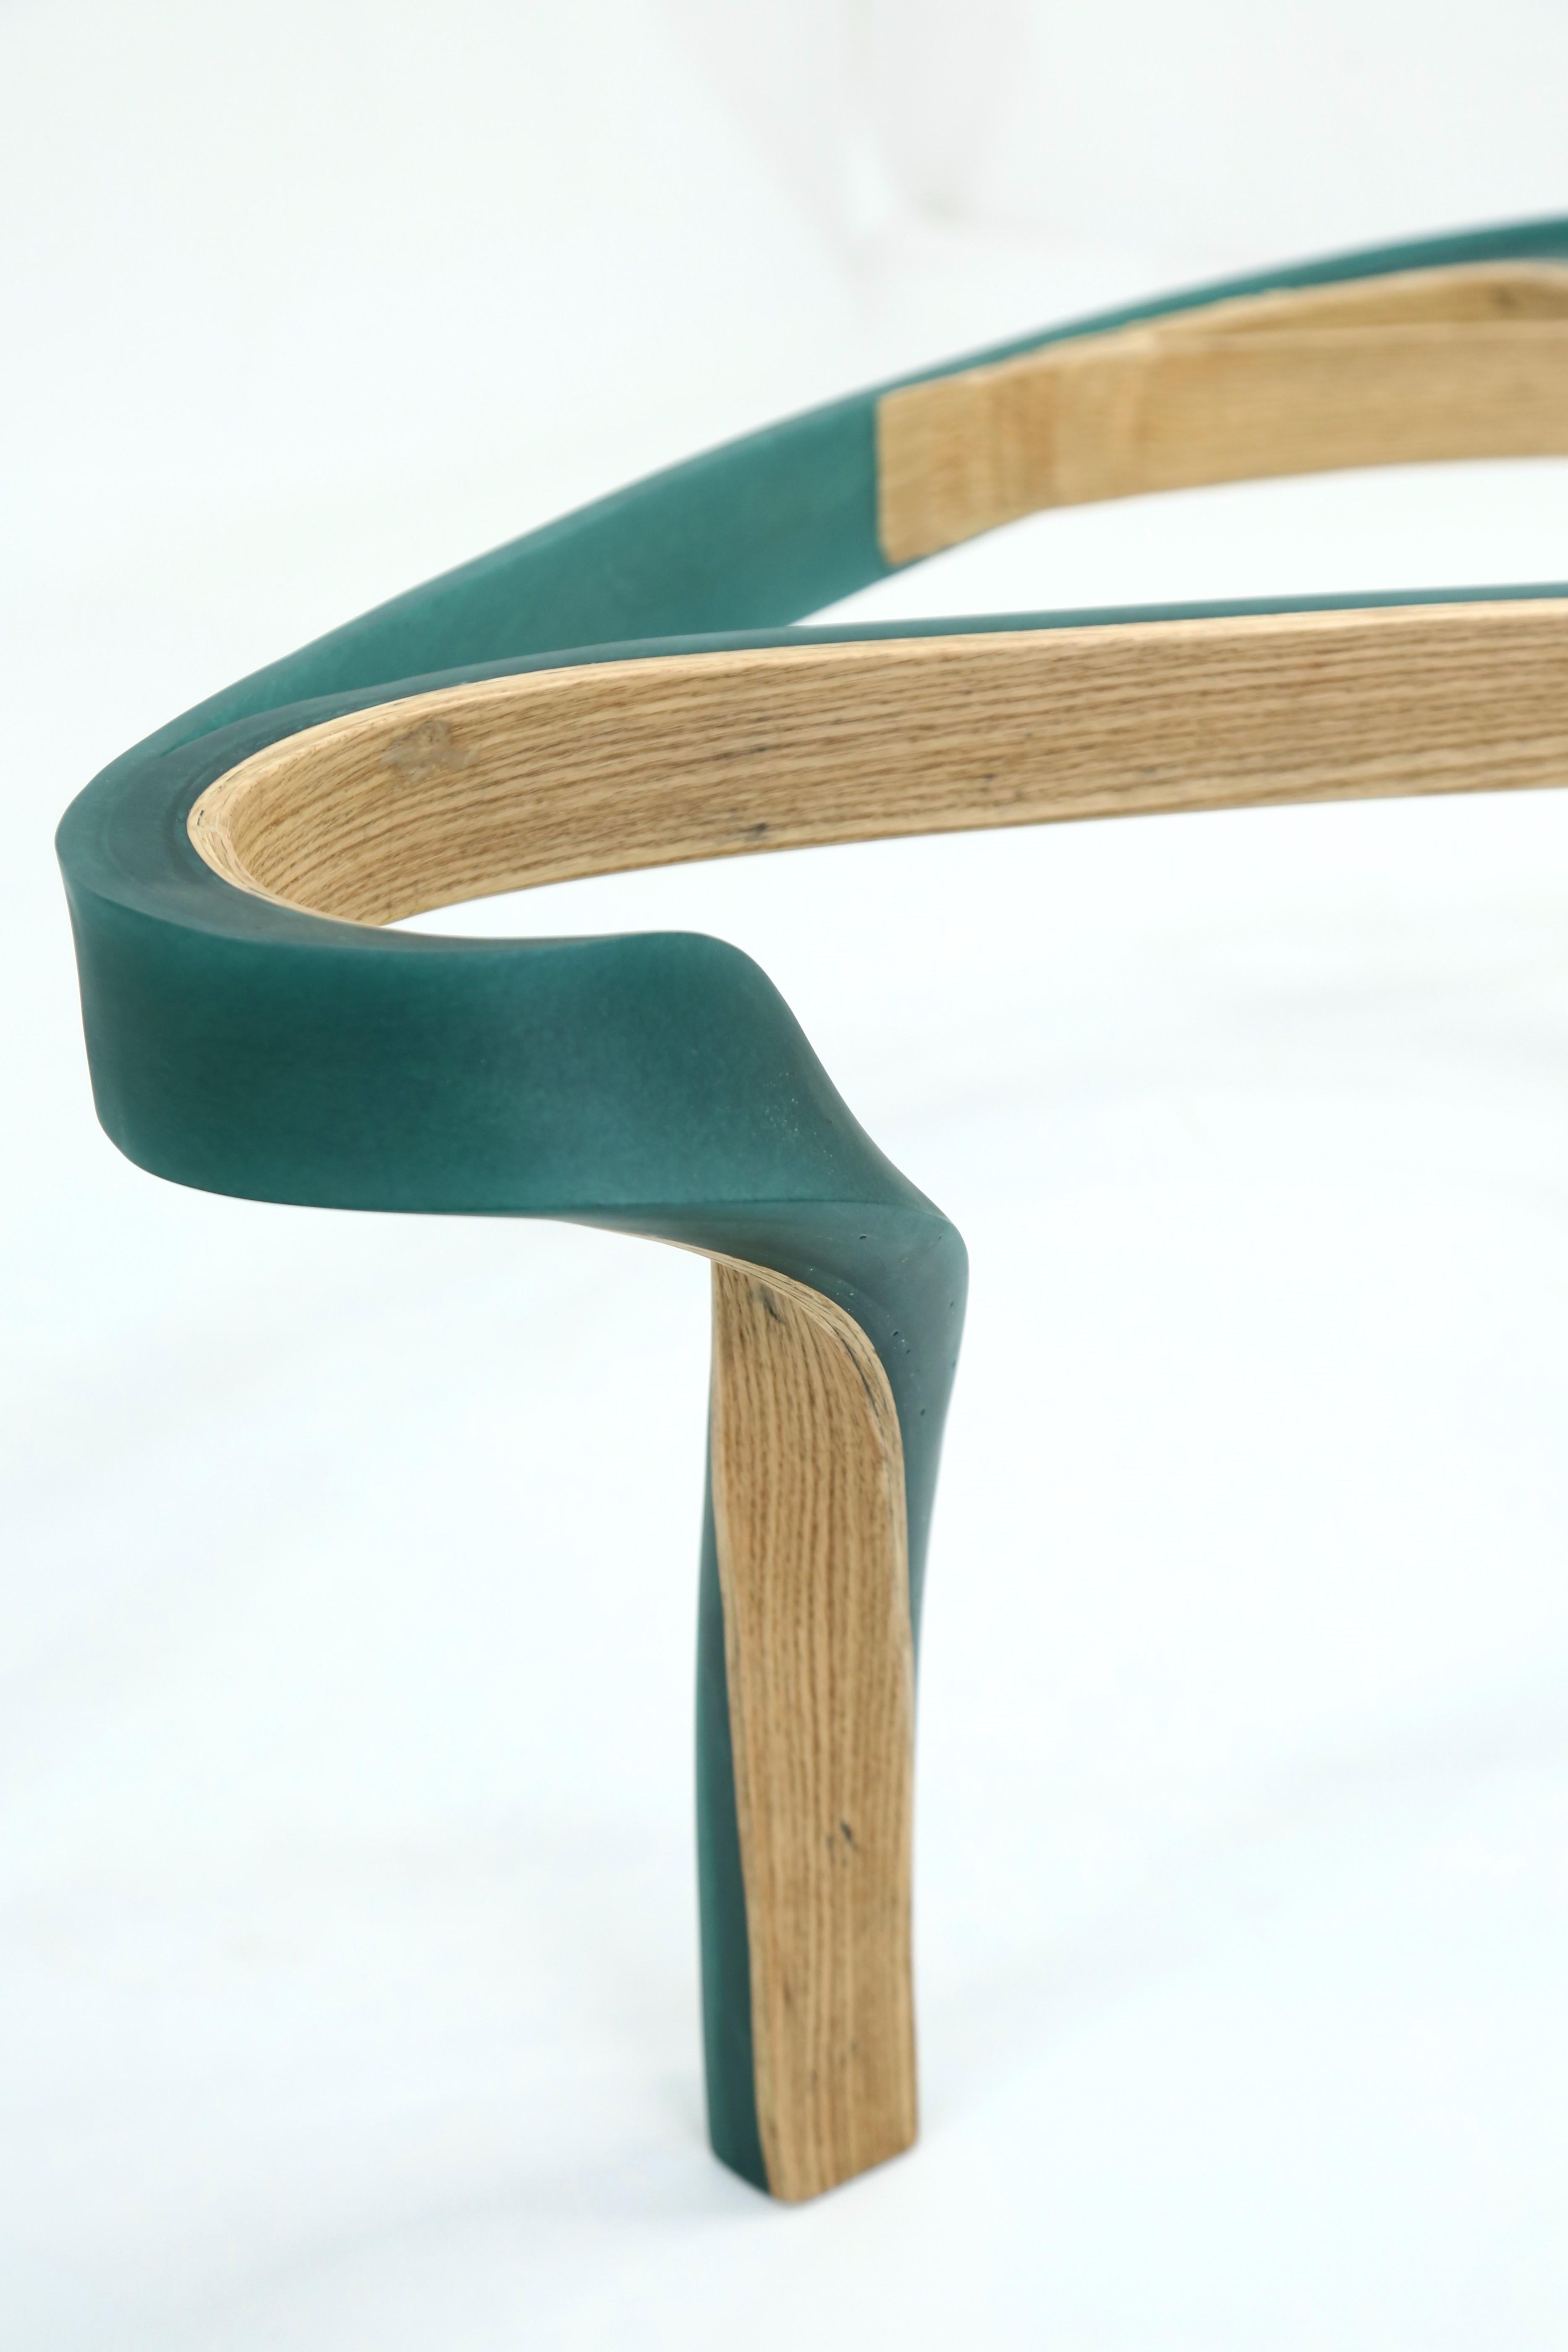 Contemporary Aquila Table by Raka Studio x Hamdi Studio - Green Resin and Ash Wood with Glass For Sale